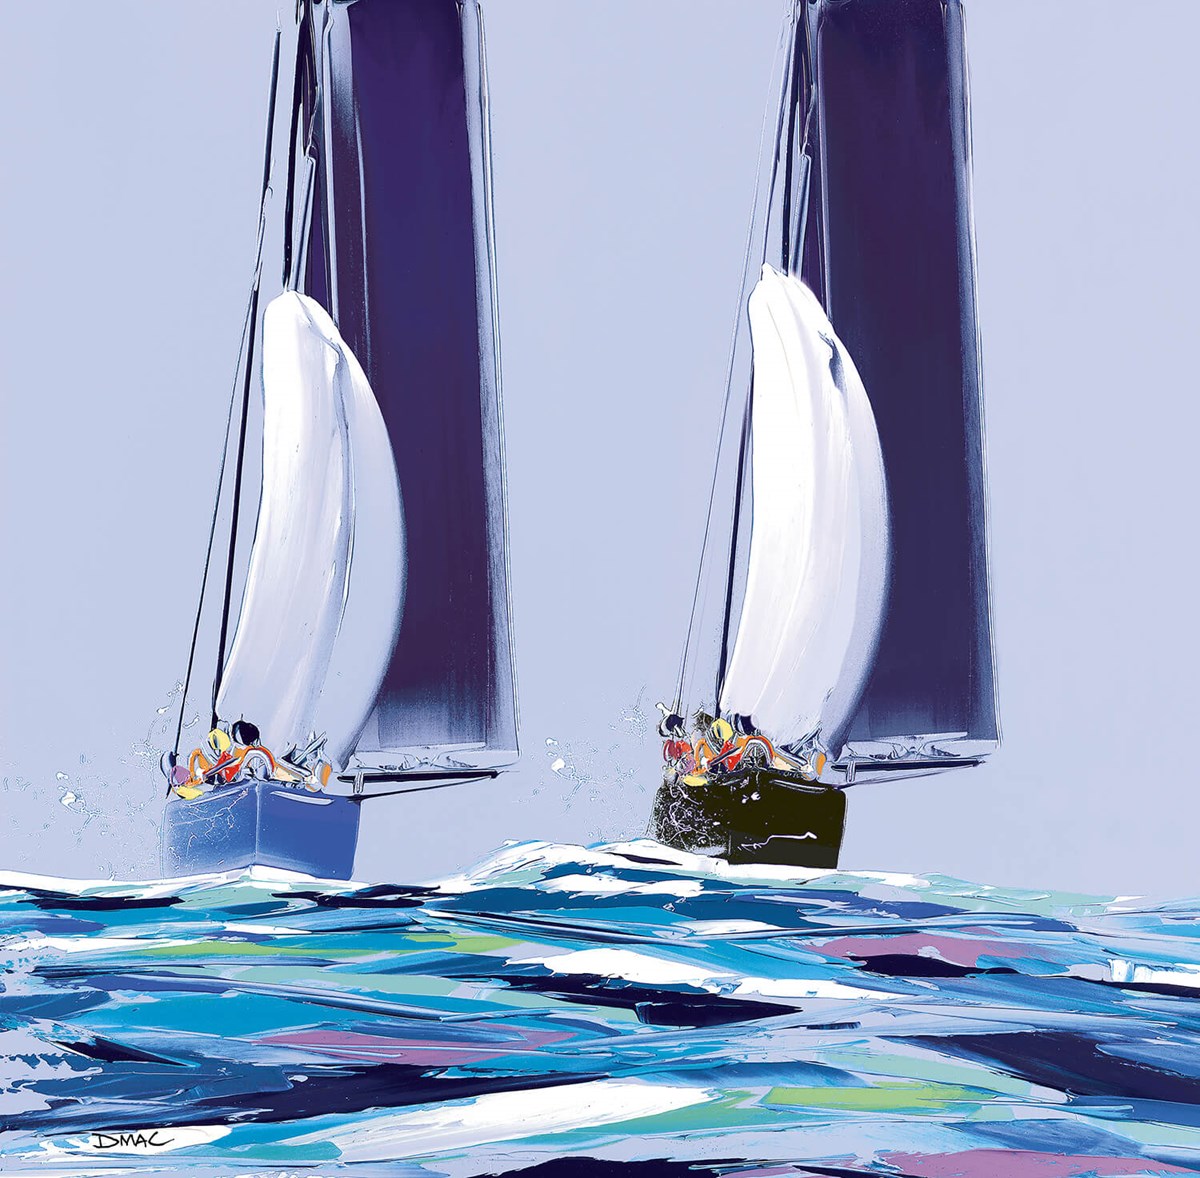 Sailing into the Blue limited edition print by Duncan MacGregor